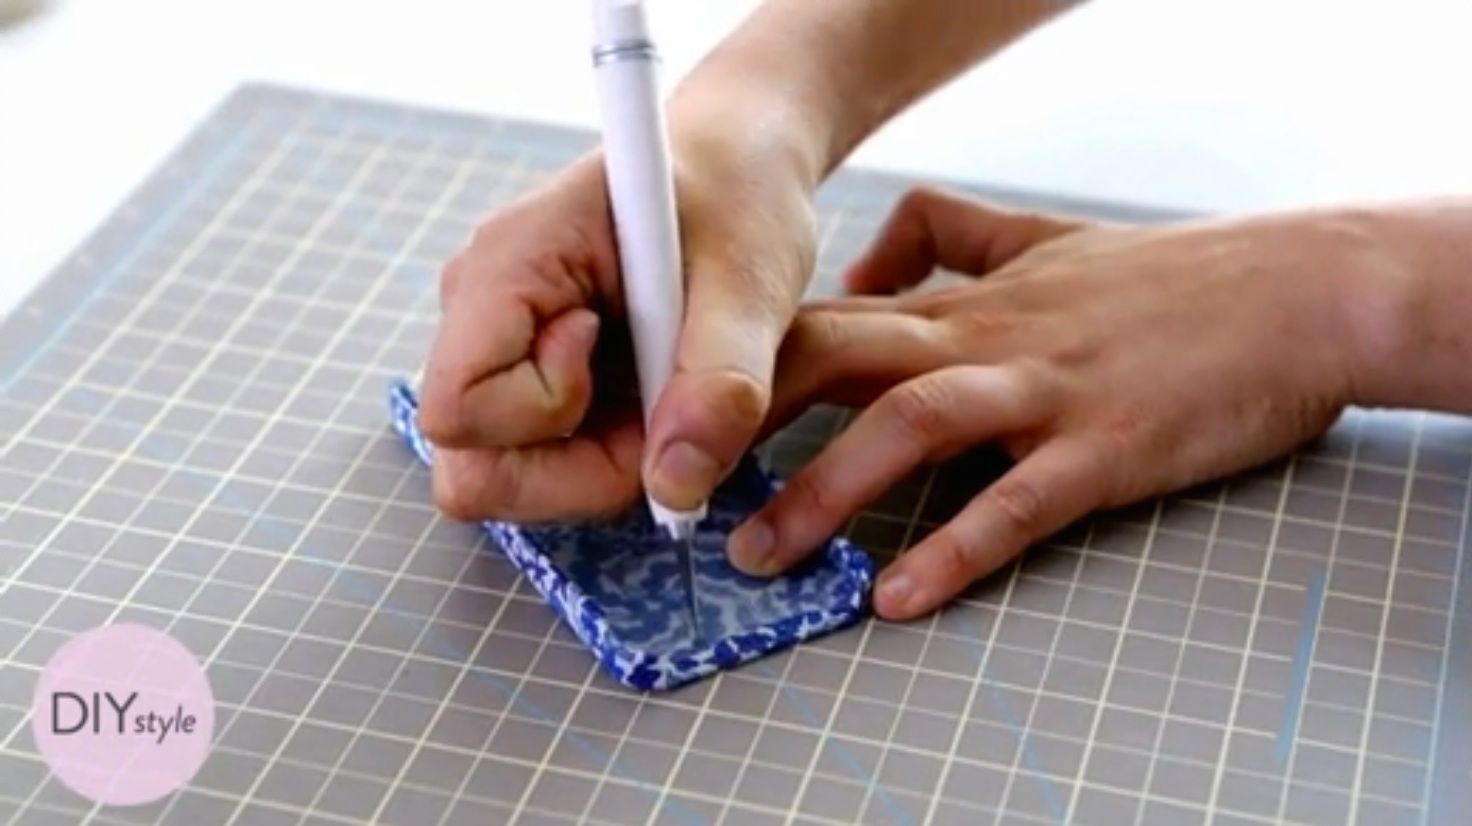 DIY fabric iPhone case: step by step instructional video on Martha Stewart